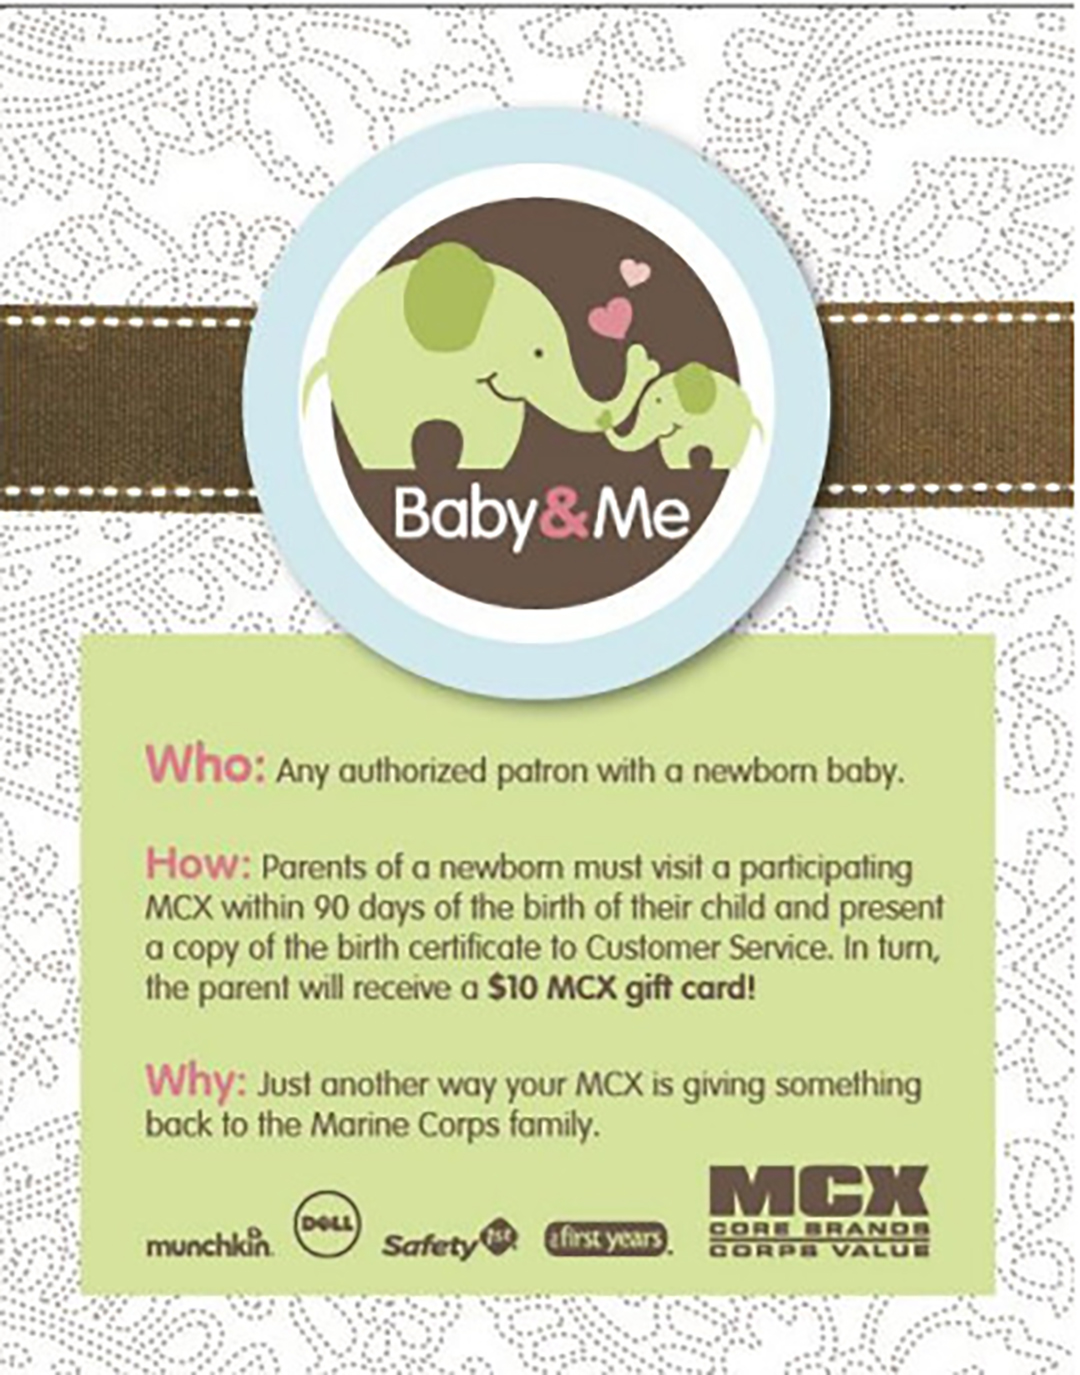 Baby & Me. Bring in the newborn's birth certificate within 90 days of their birth for a $10 MCX gift card.